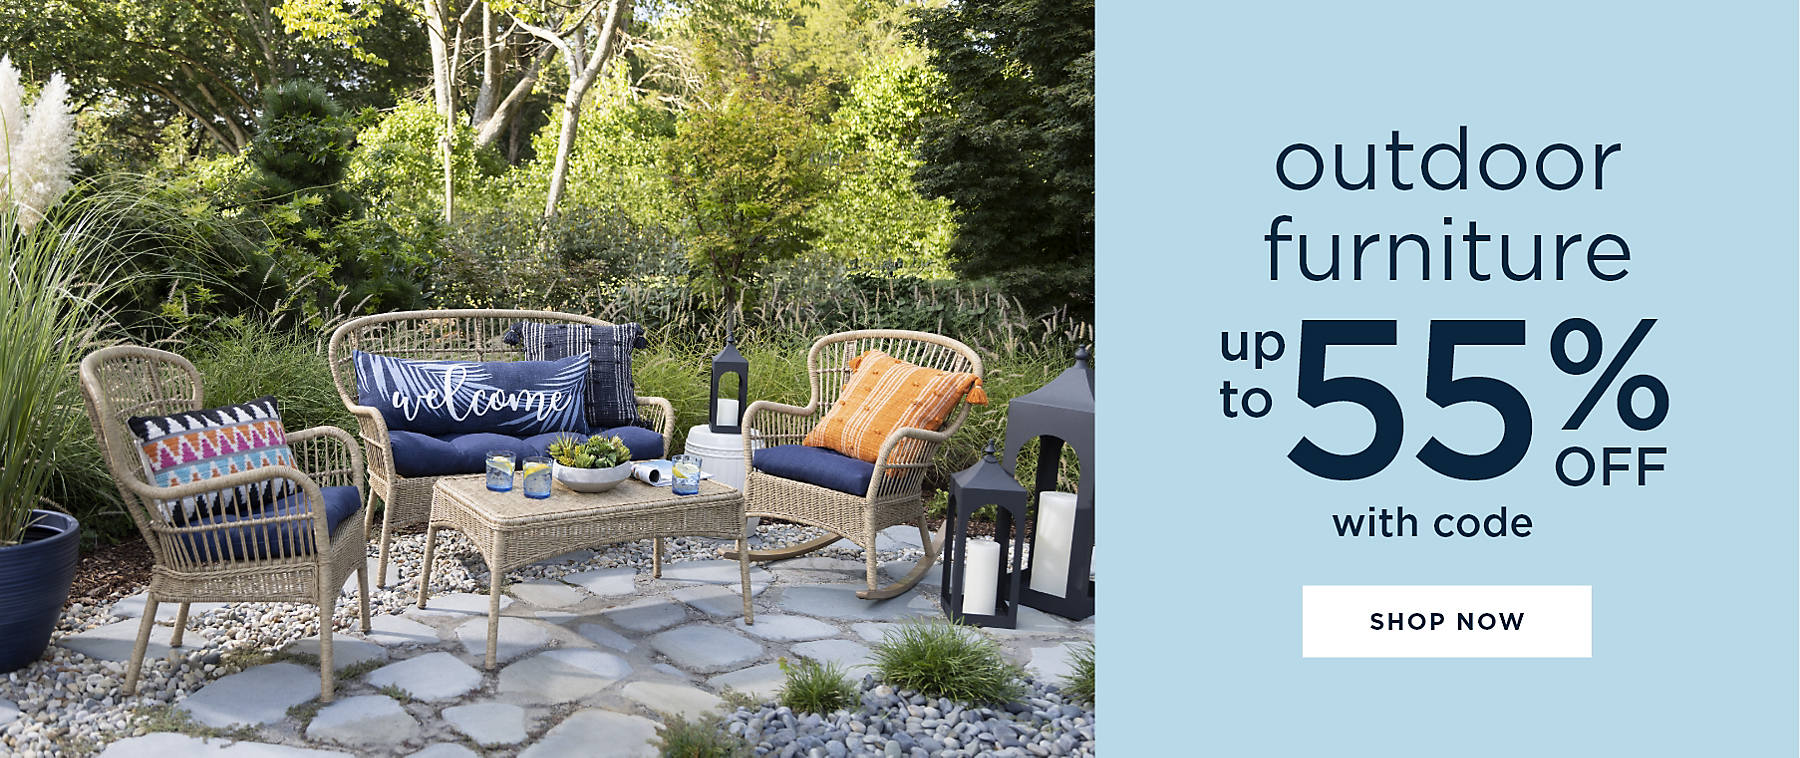 outdoor furniture up to 55% off with code shop now